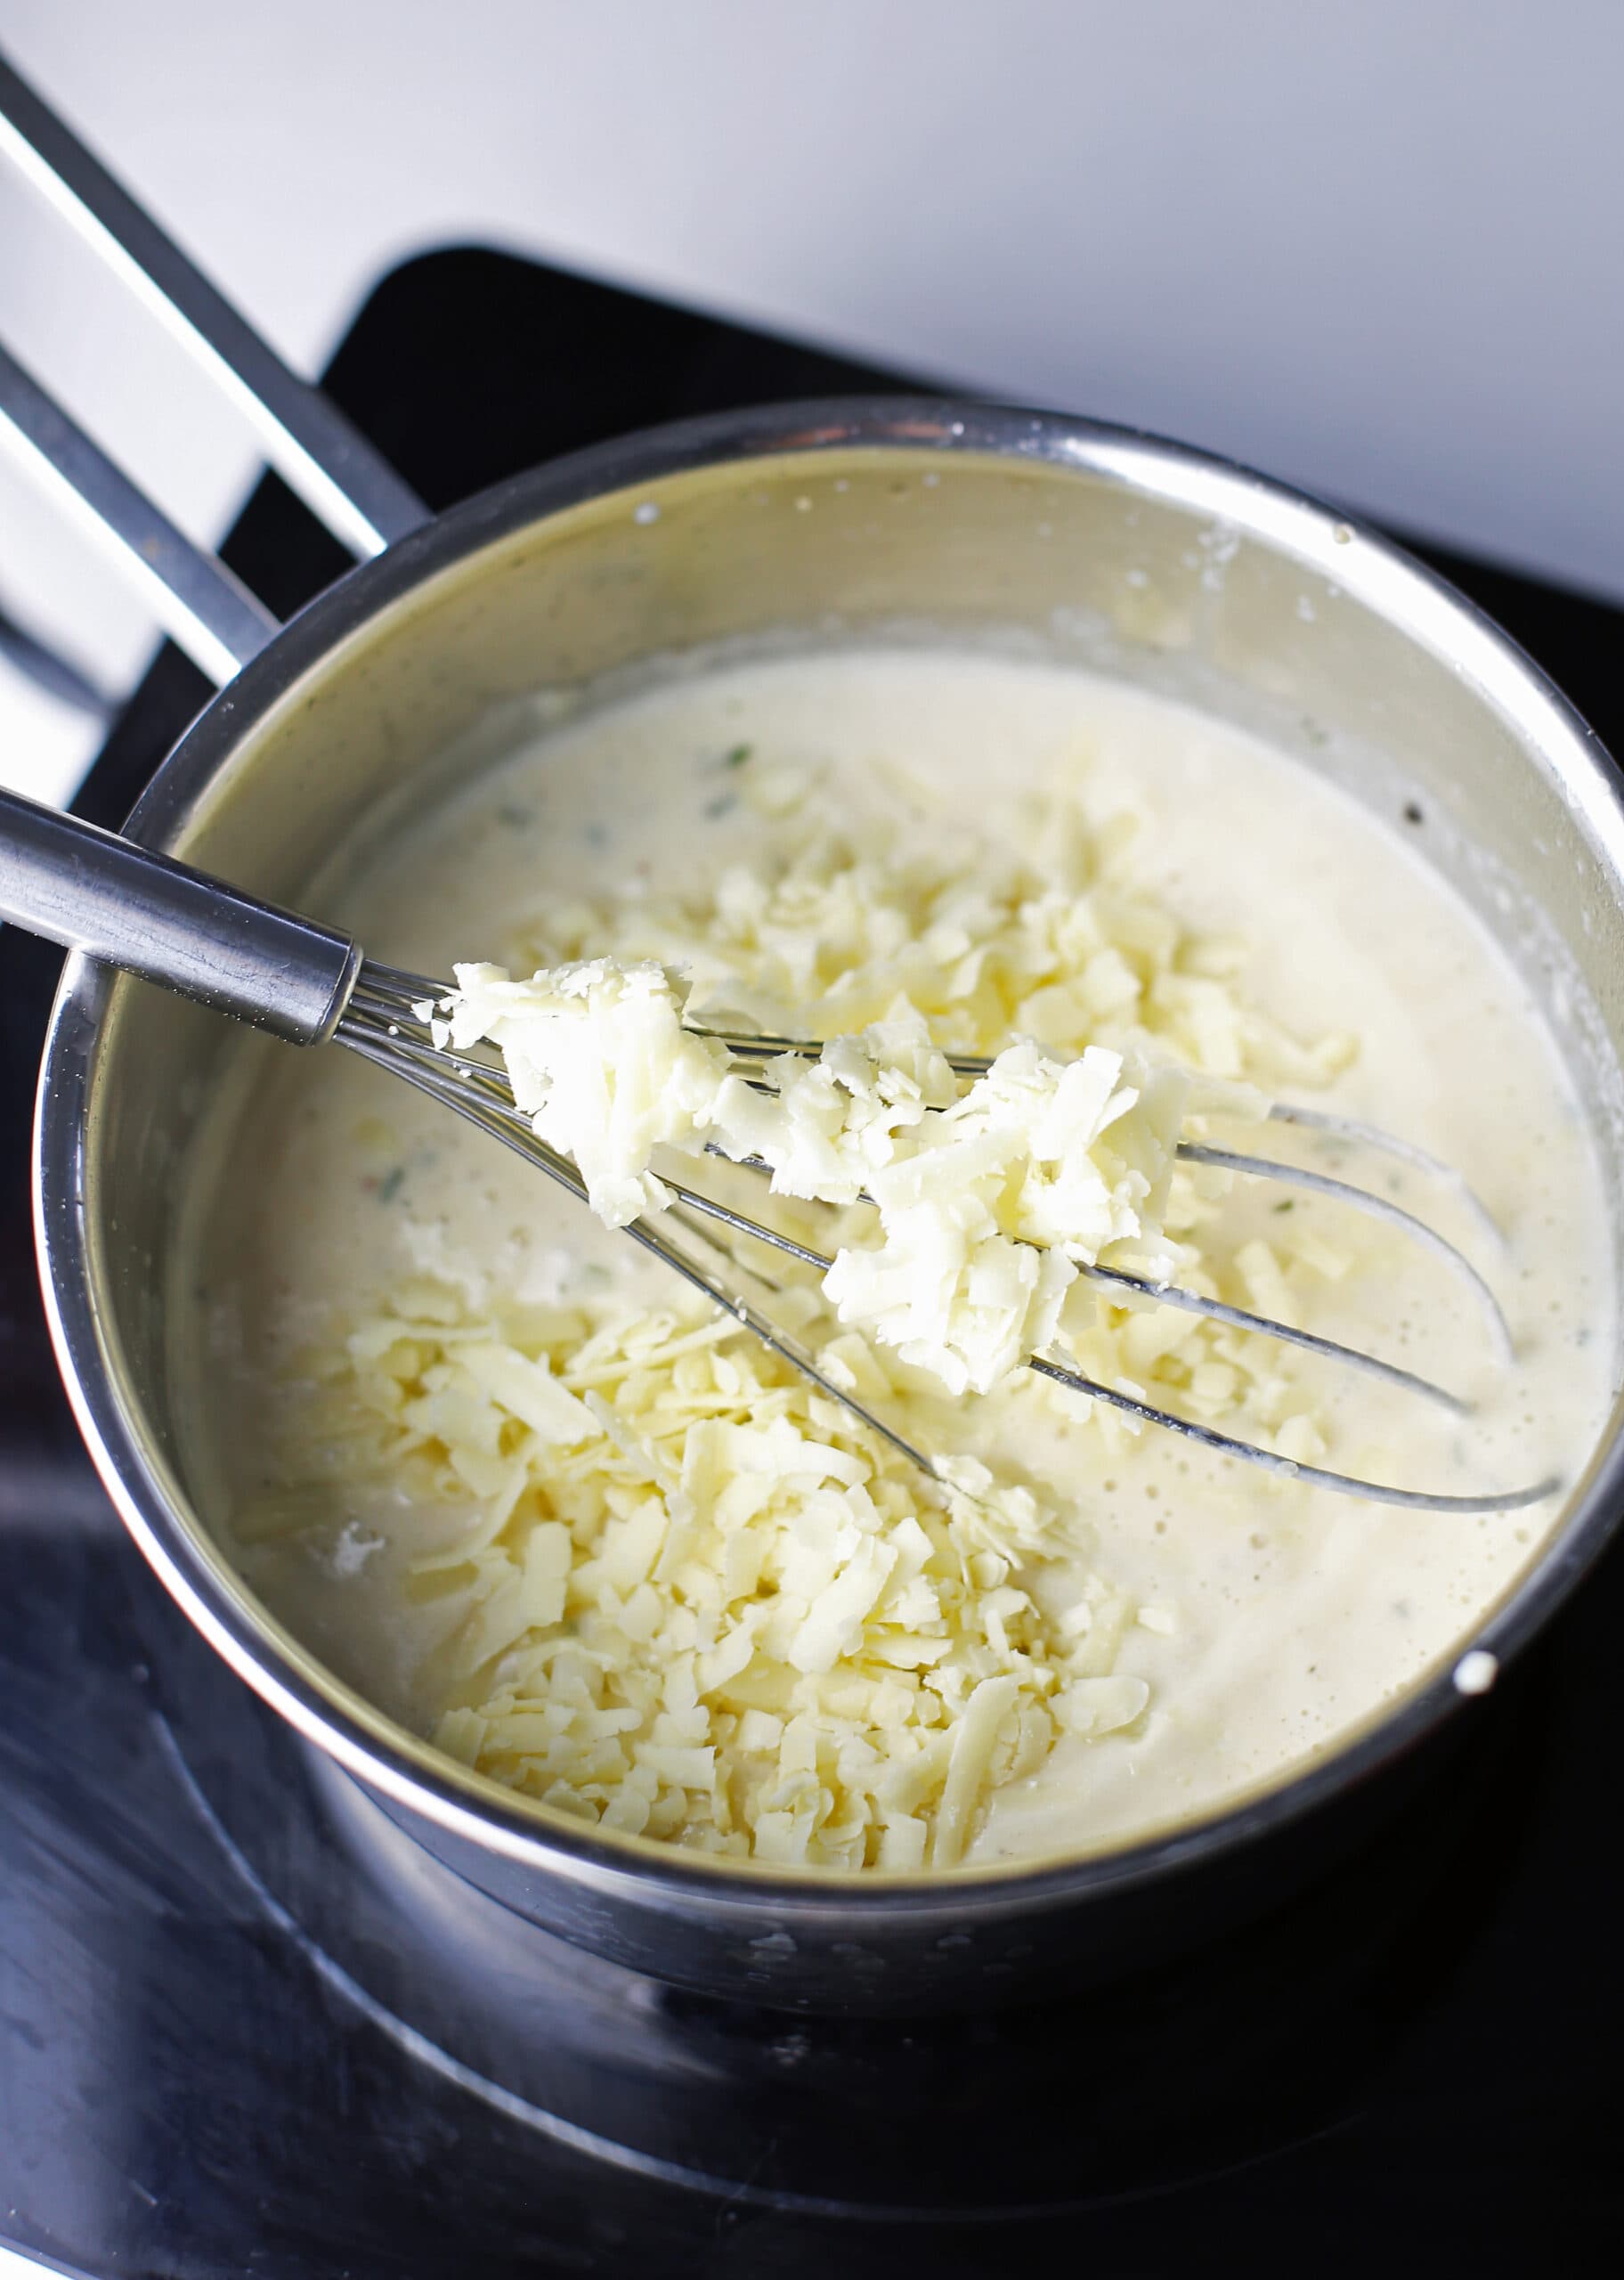 Grated cheddar cheese just added to white sauce in a saucepan with a whisk.